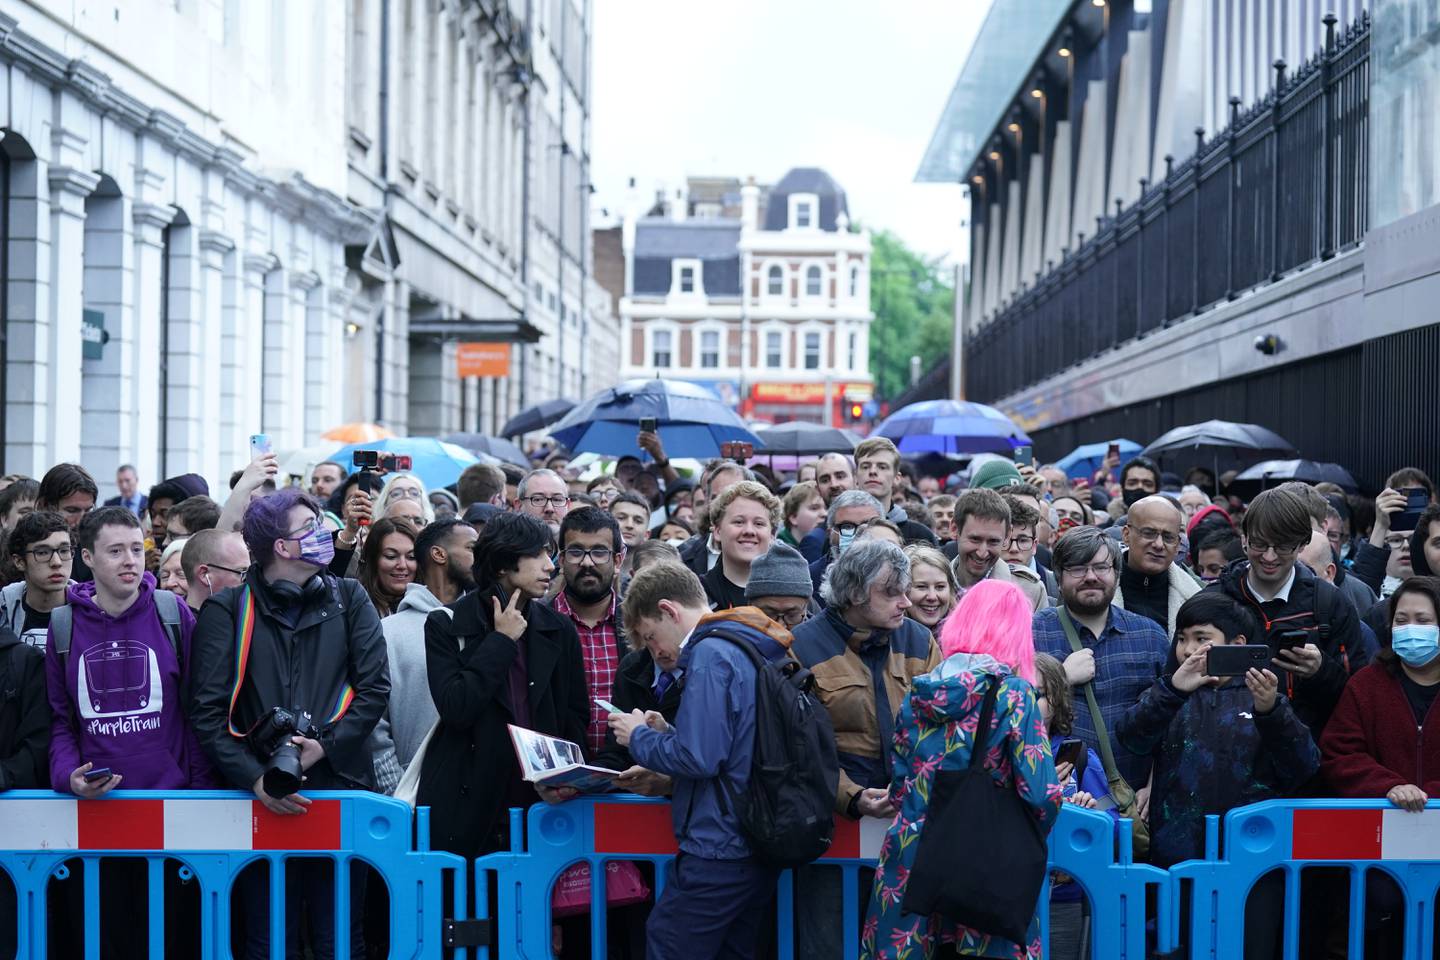 Crowds wait in line to board the first Elizabeth line train to carry passengers at Paddington Station, London. PA